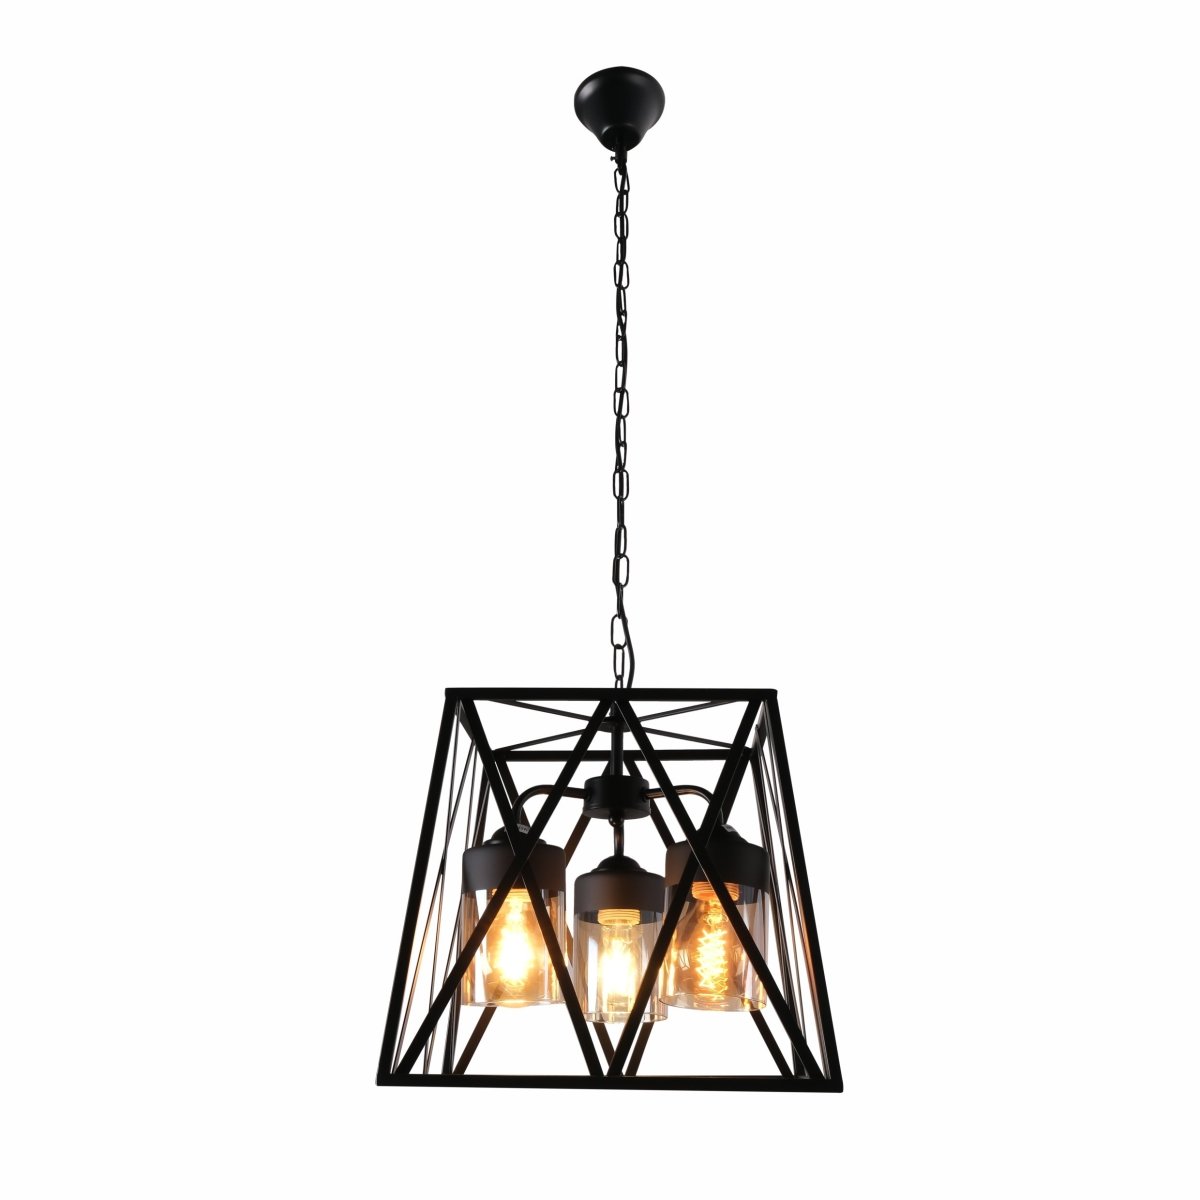 Main image of Black Metal Body Amber Cylinder Glass Cage Cuboid Chandelier with 3xE27 Fittings | TEKLED 159-17414